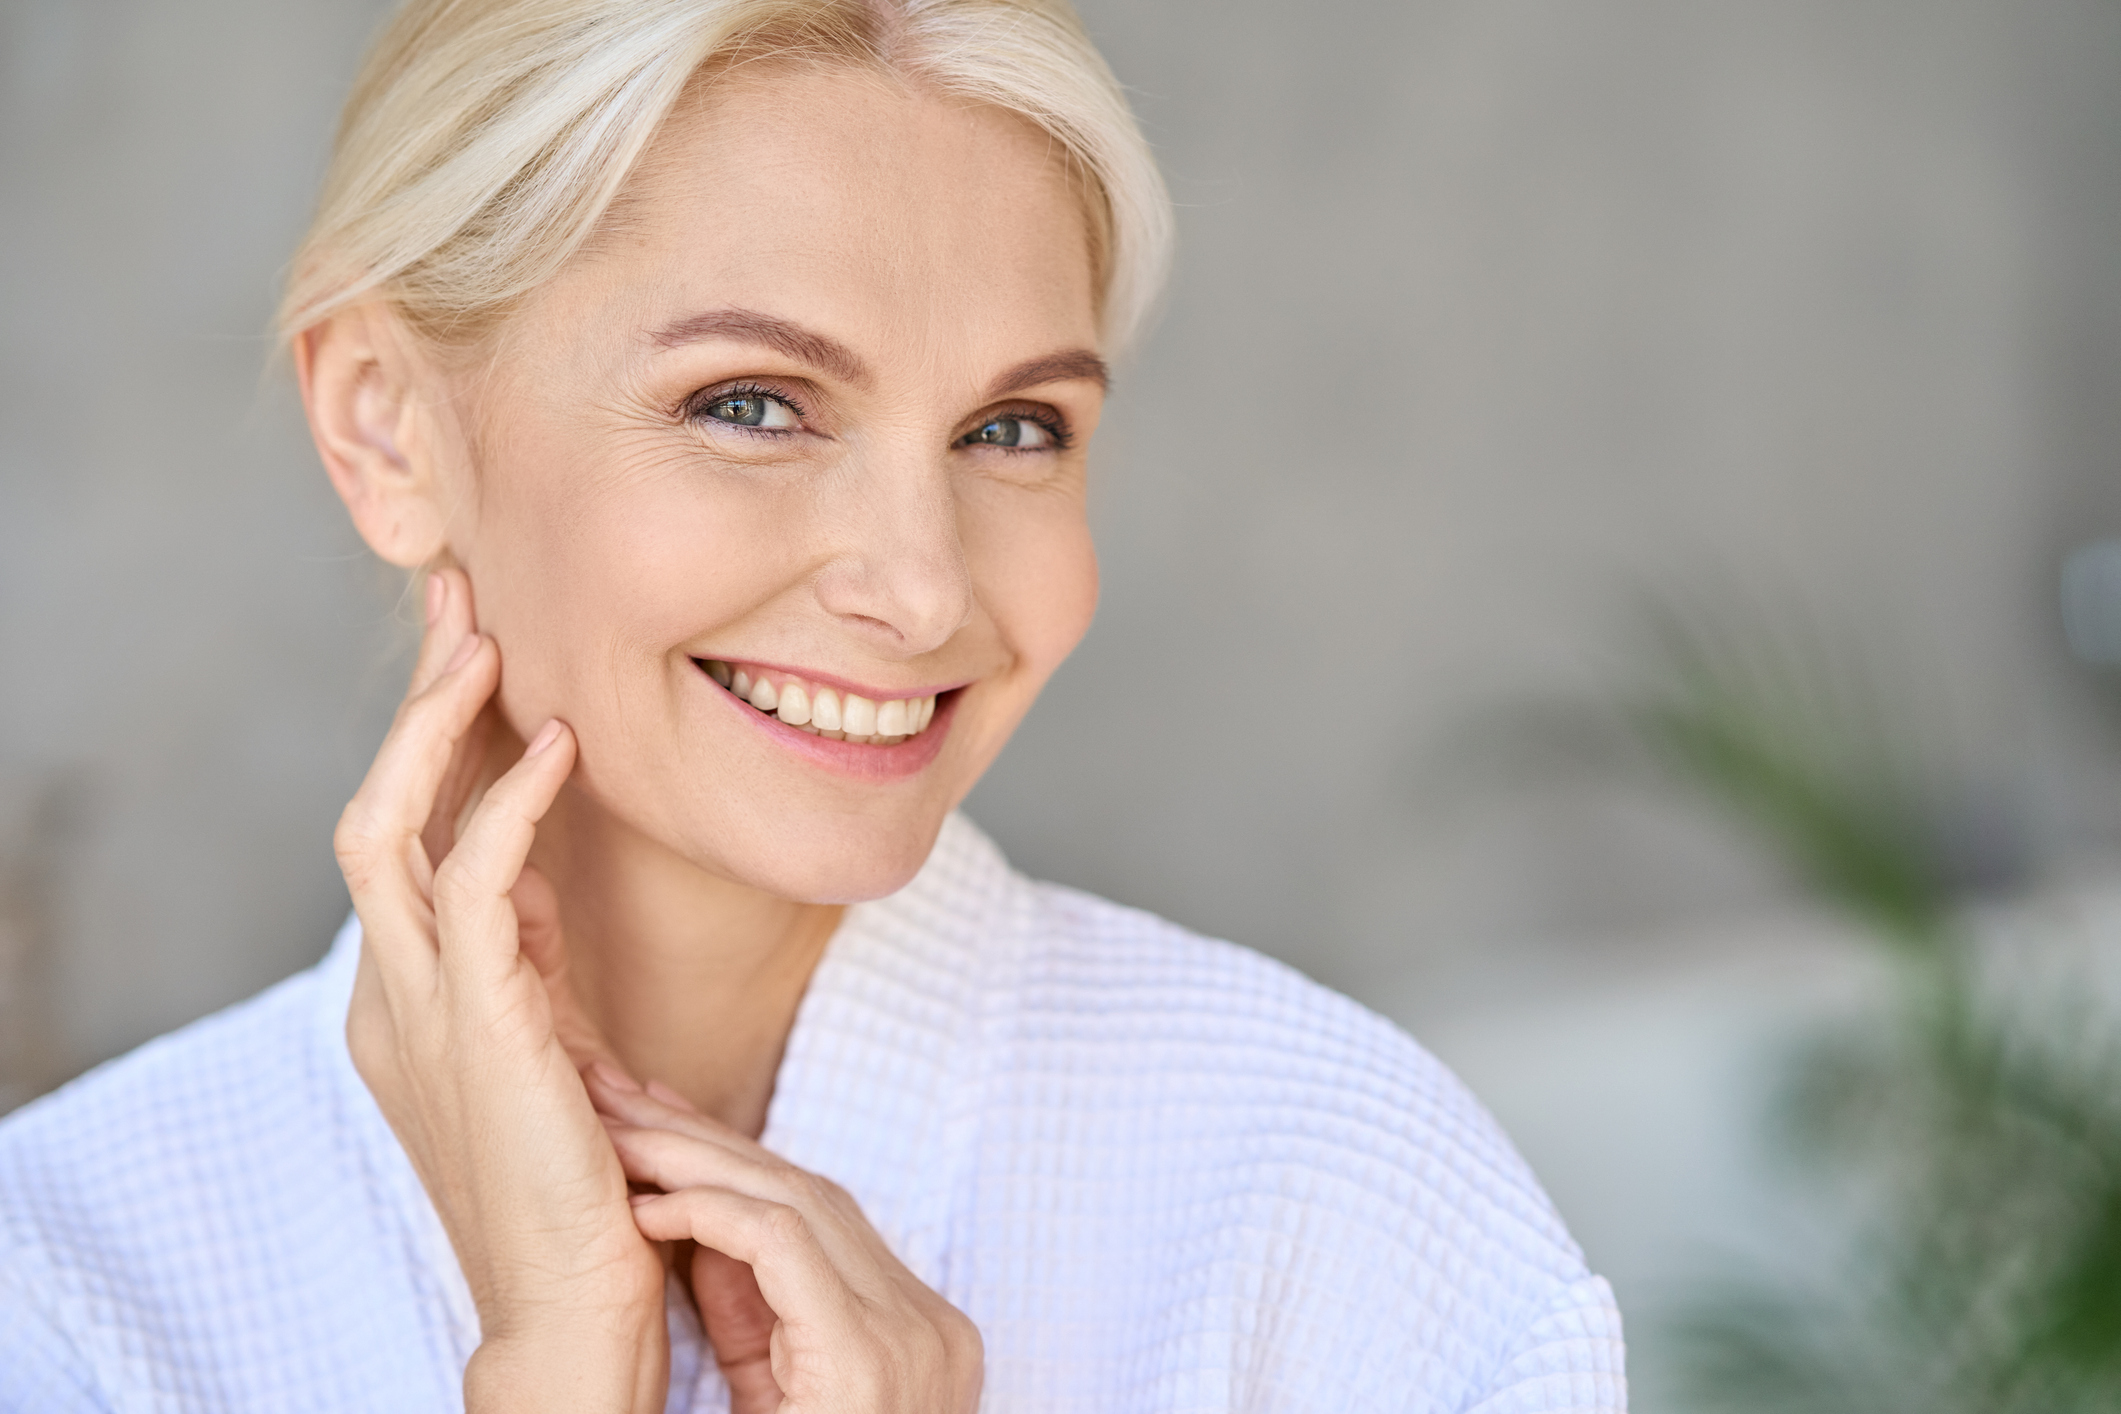 Got Age Spots and Hyperpigmentation? Know What You Can Do